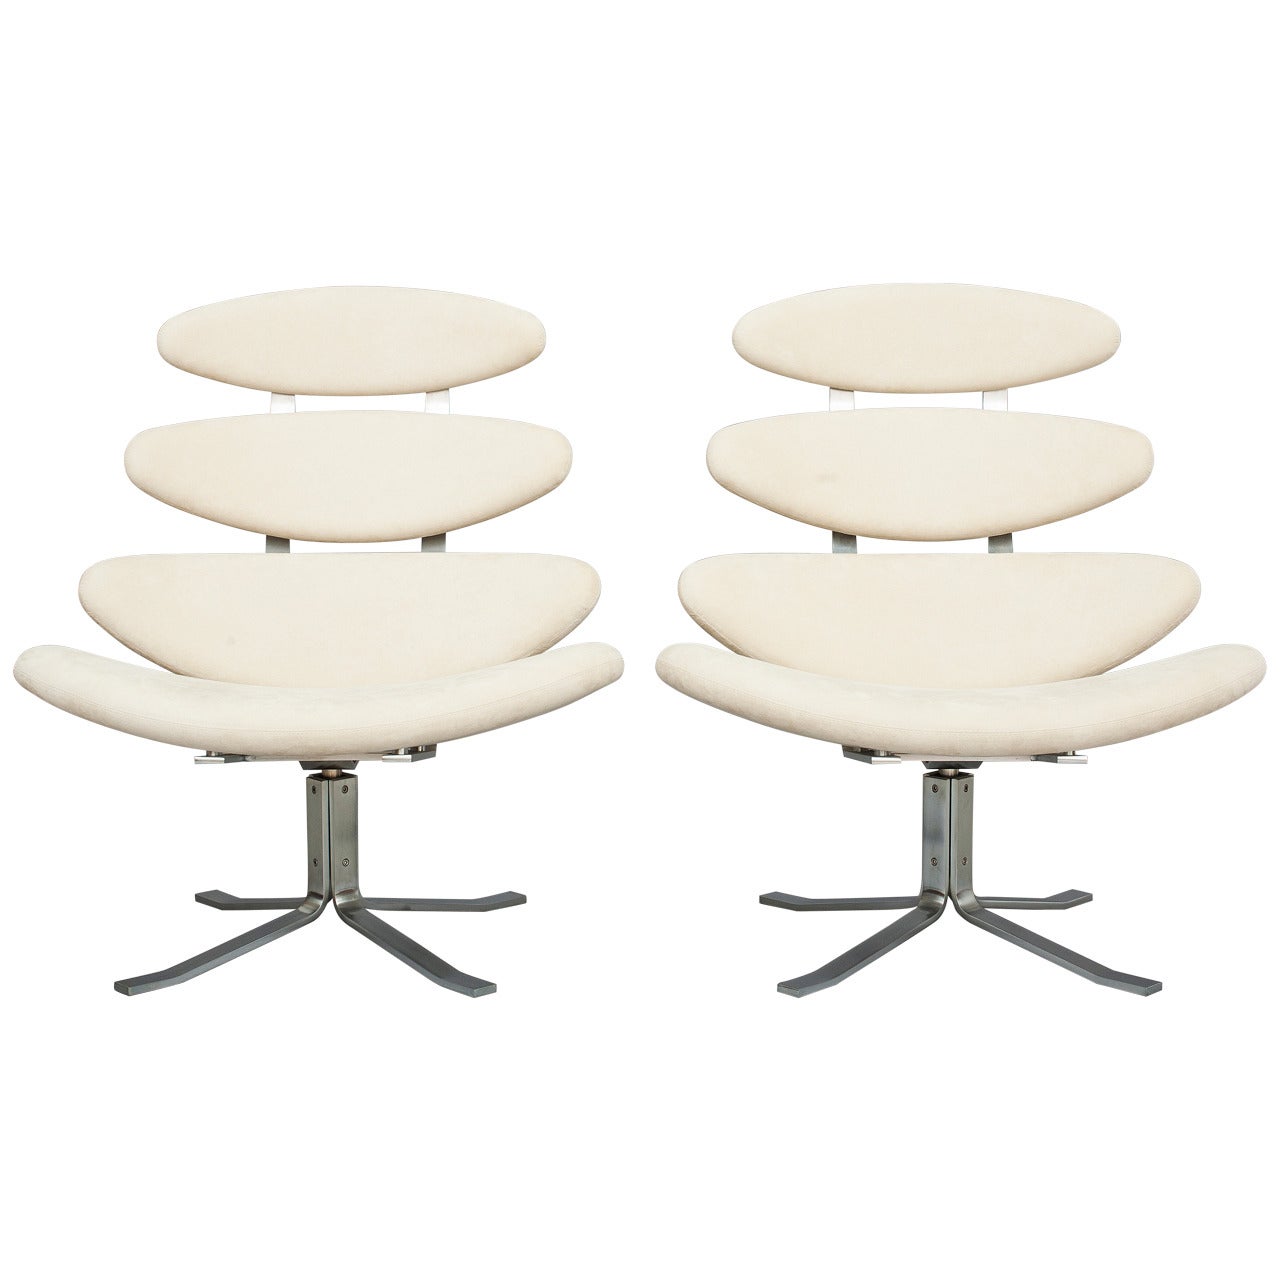 Pair of "Corona" Chairs by Poul M. Volther for Erik Jørgensen